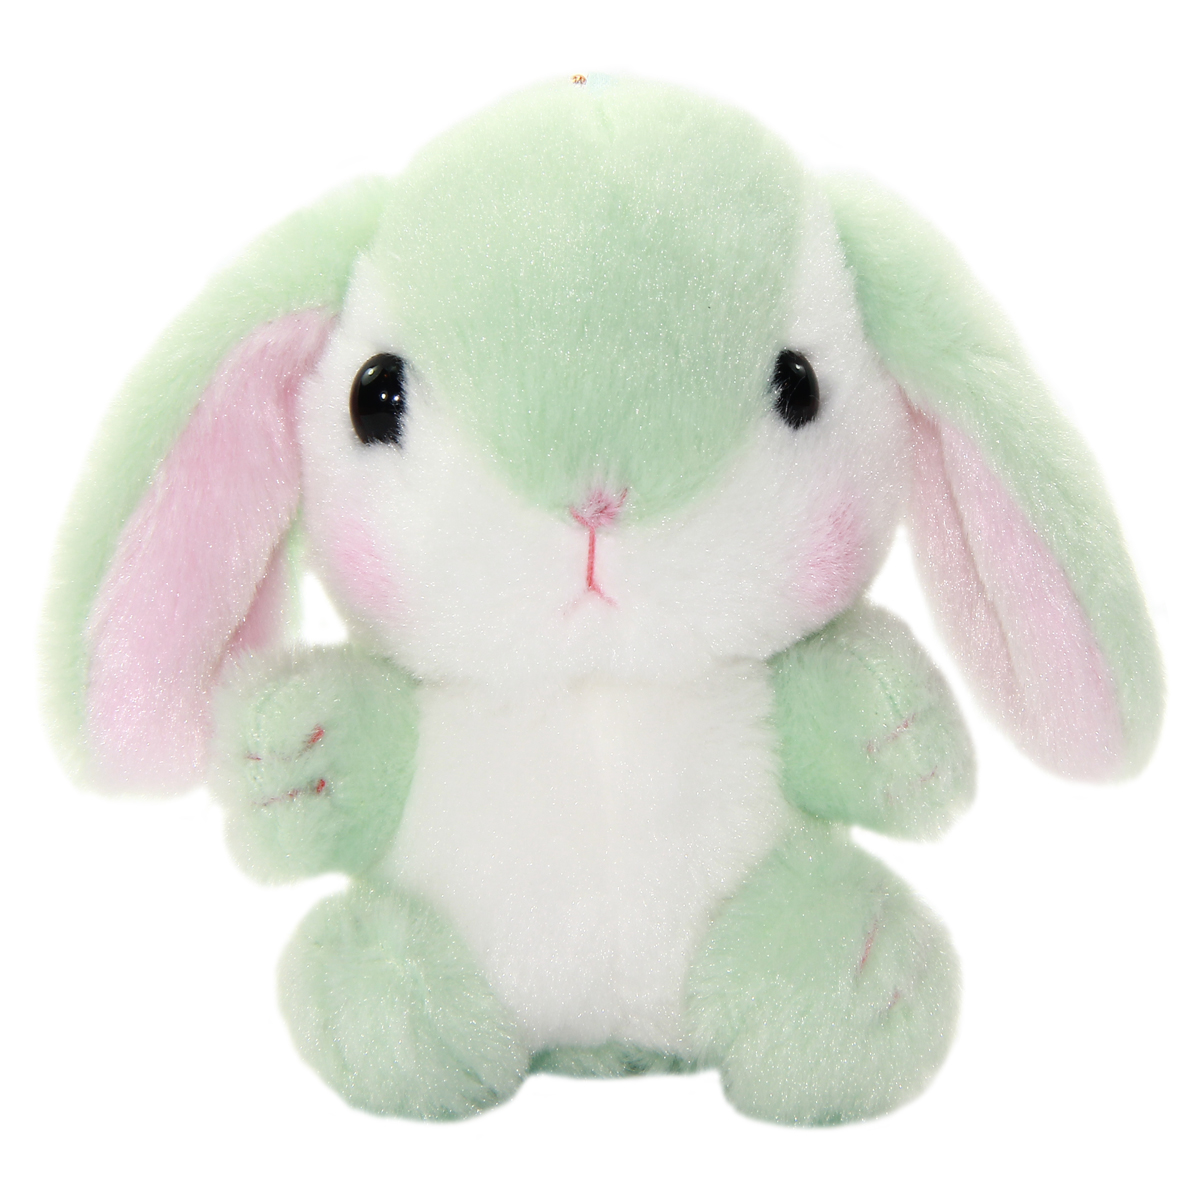 Amuse Bunny Plushie Cute Stuffed Animal Toy Green / White 5 Inches